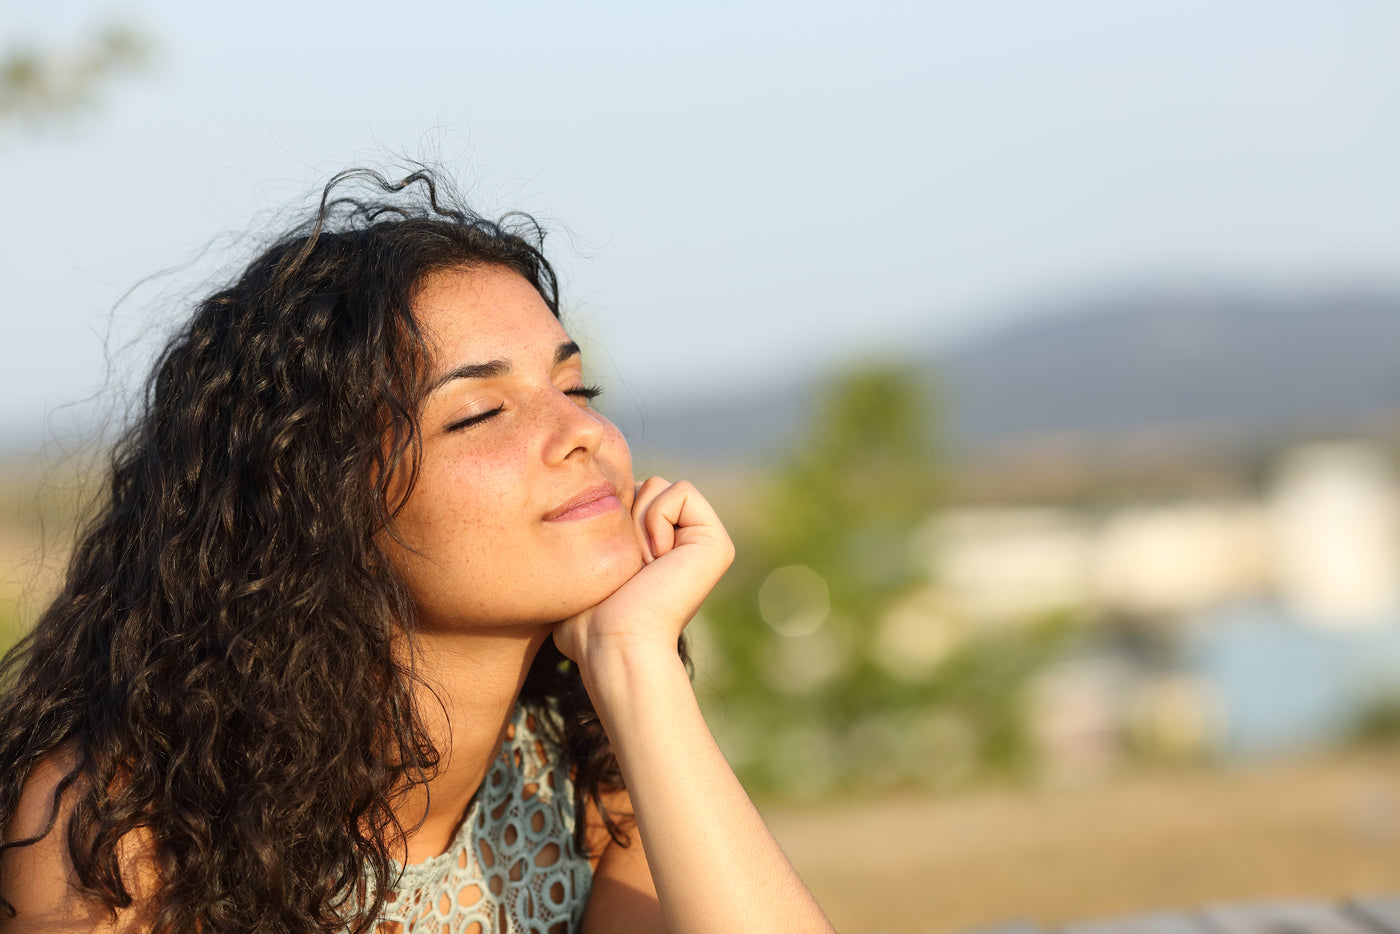 Proper Vitamin D Function is Critical for a Happy Mood